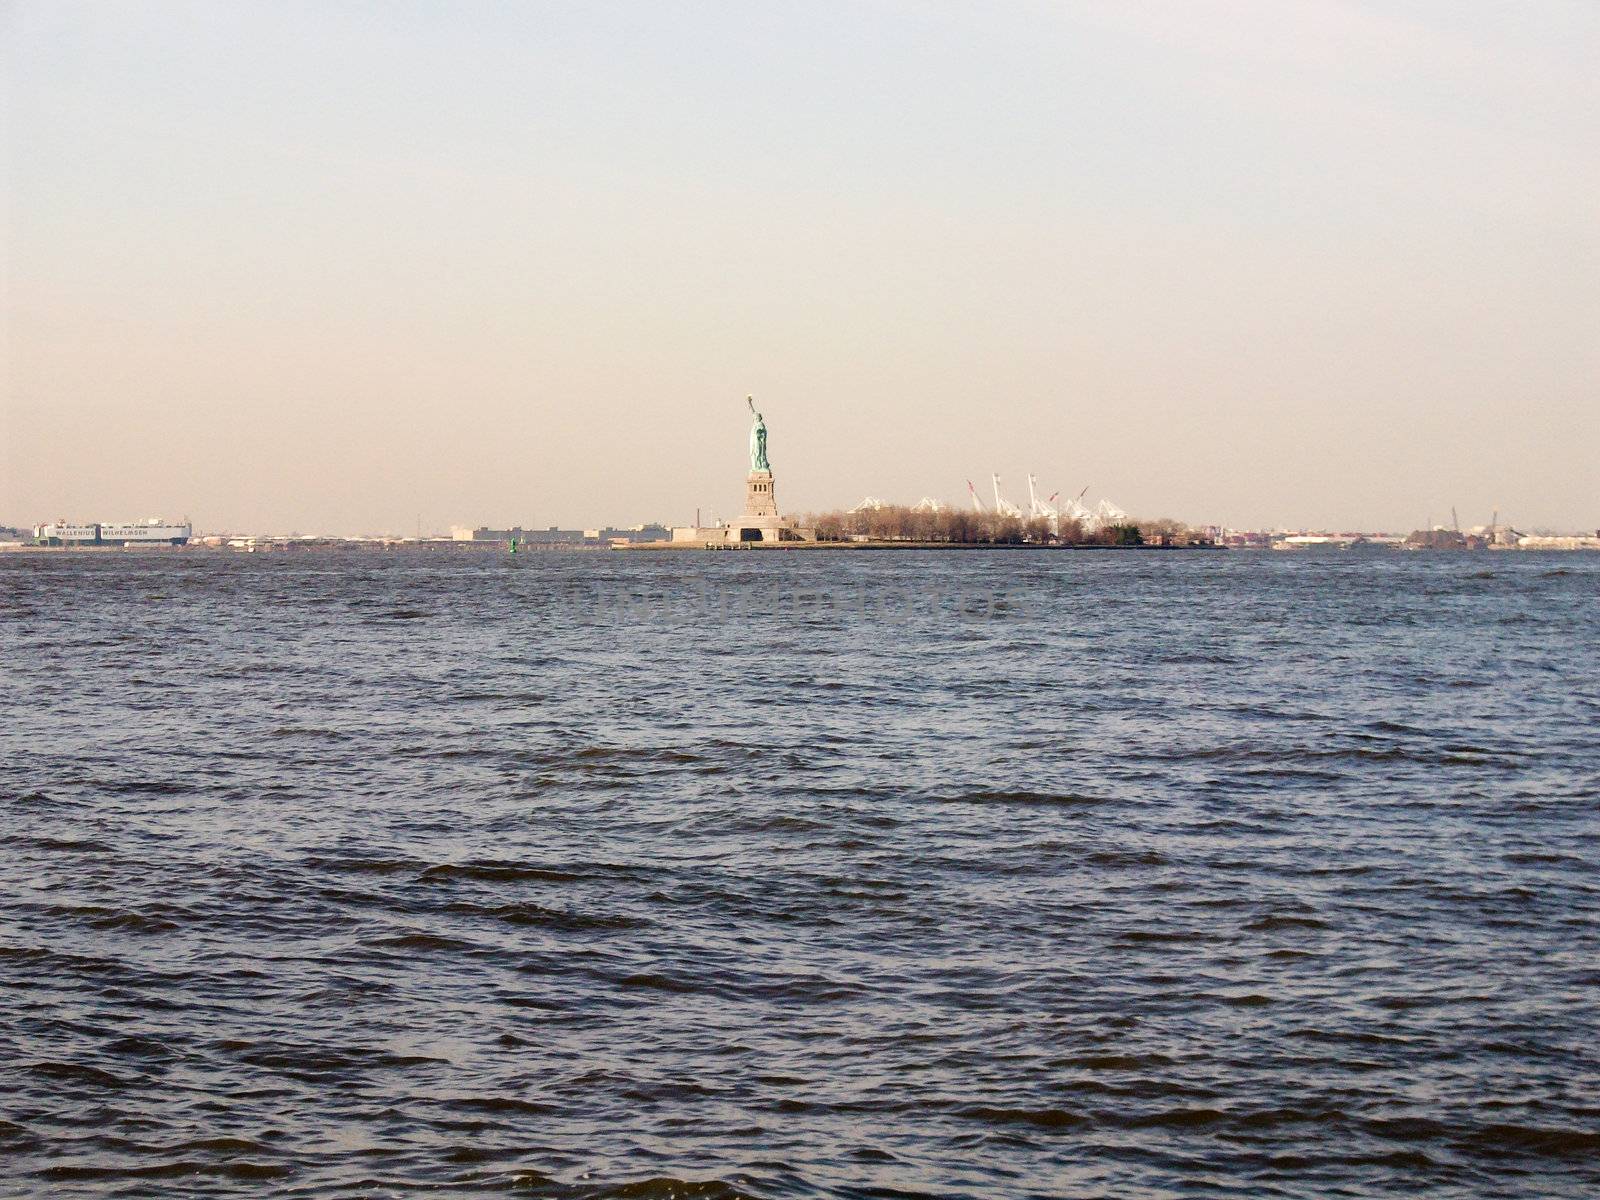 River View of the Statue of Liberty